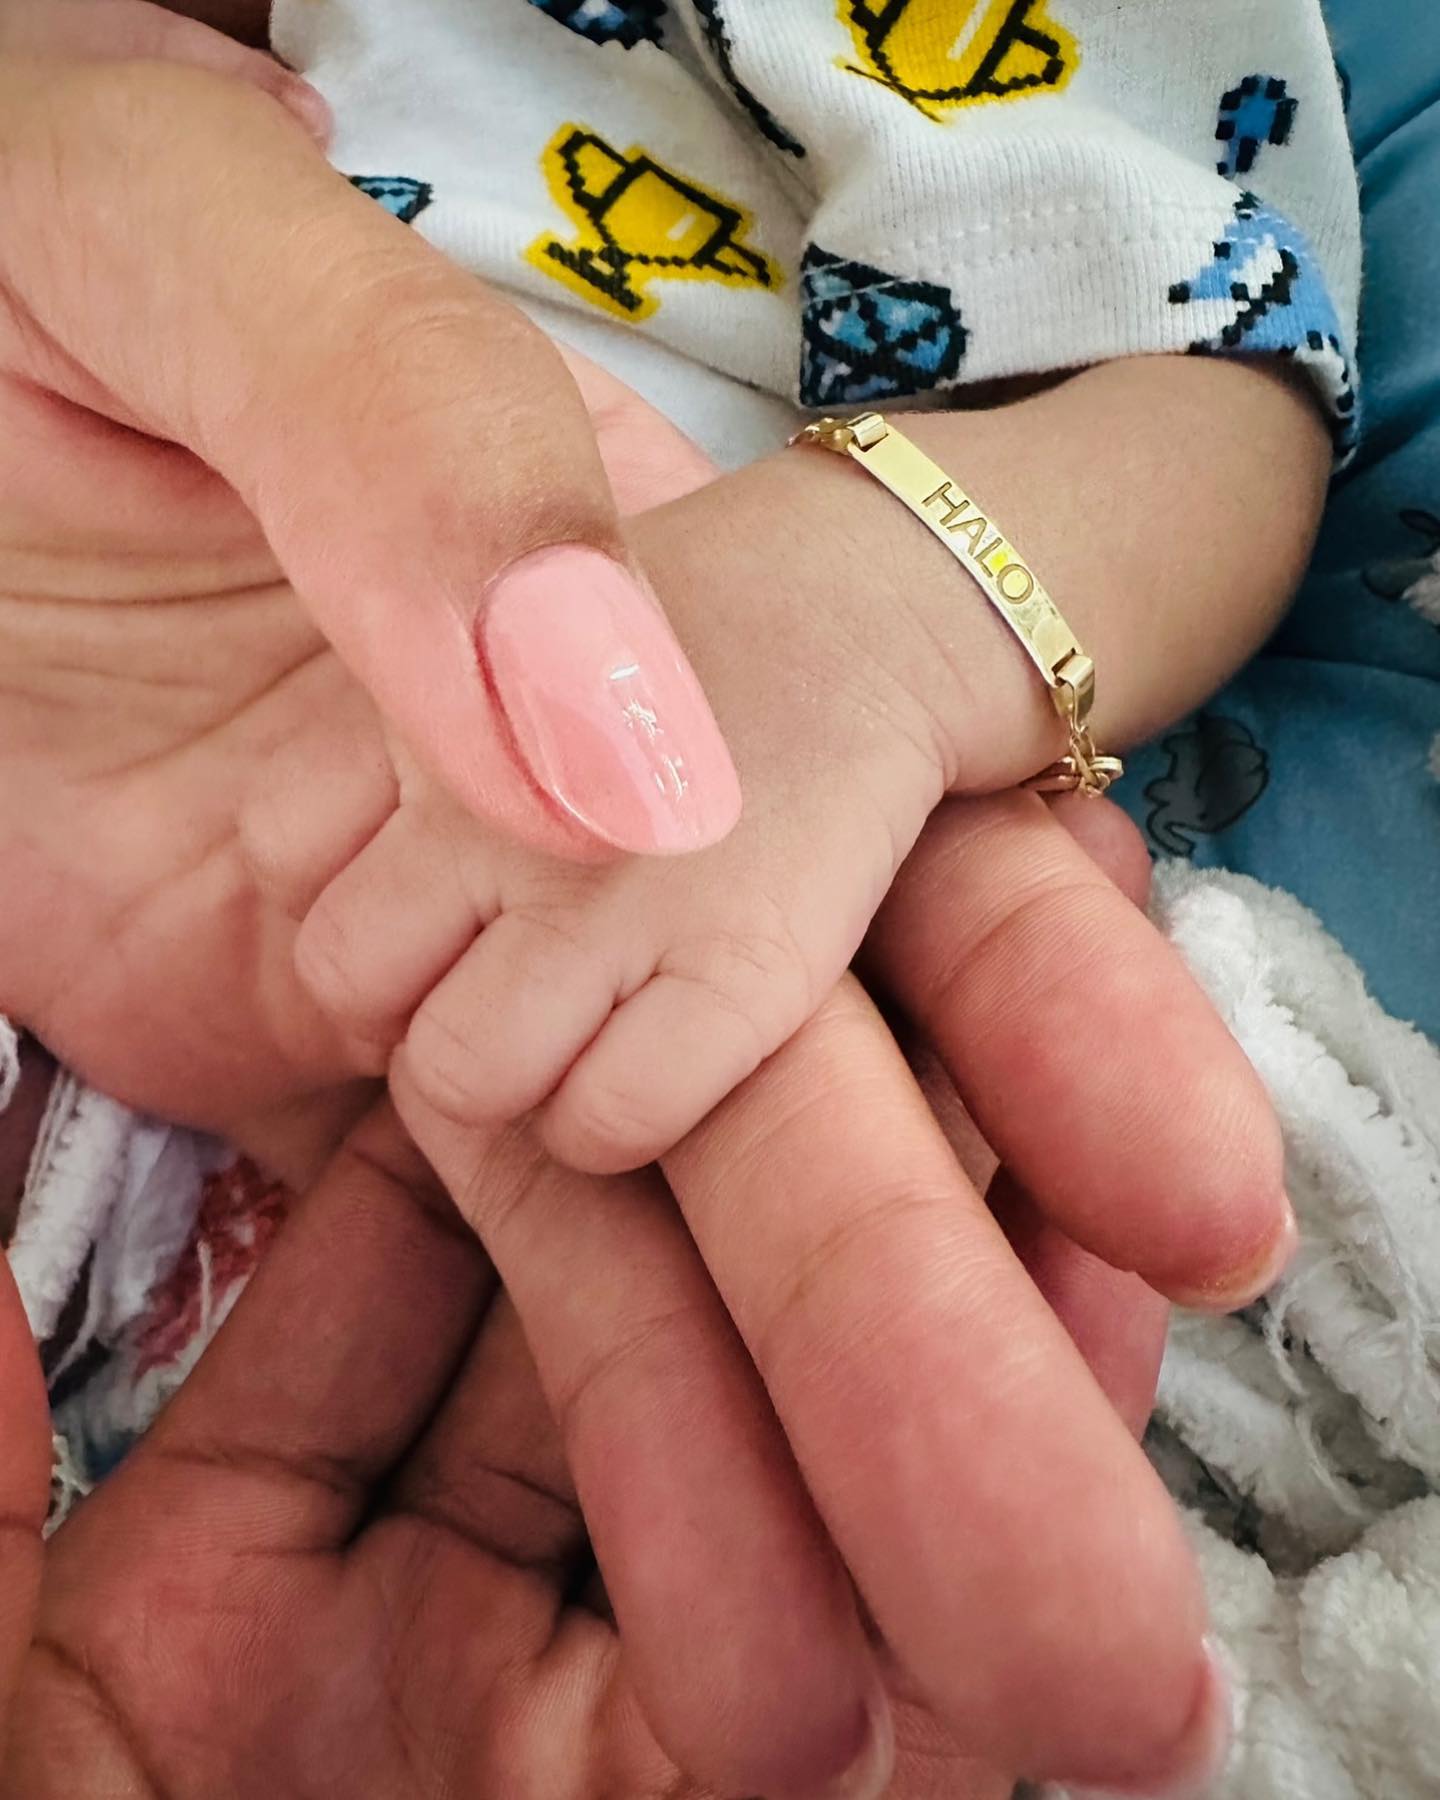 The star finally announced she had given birth by sharing a photo of her newborn's hand on Instagram